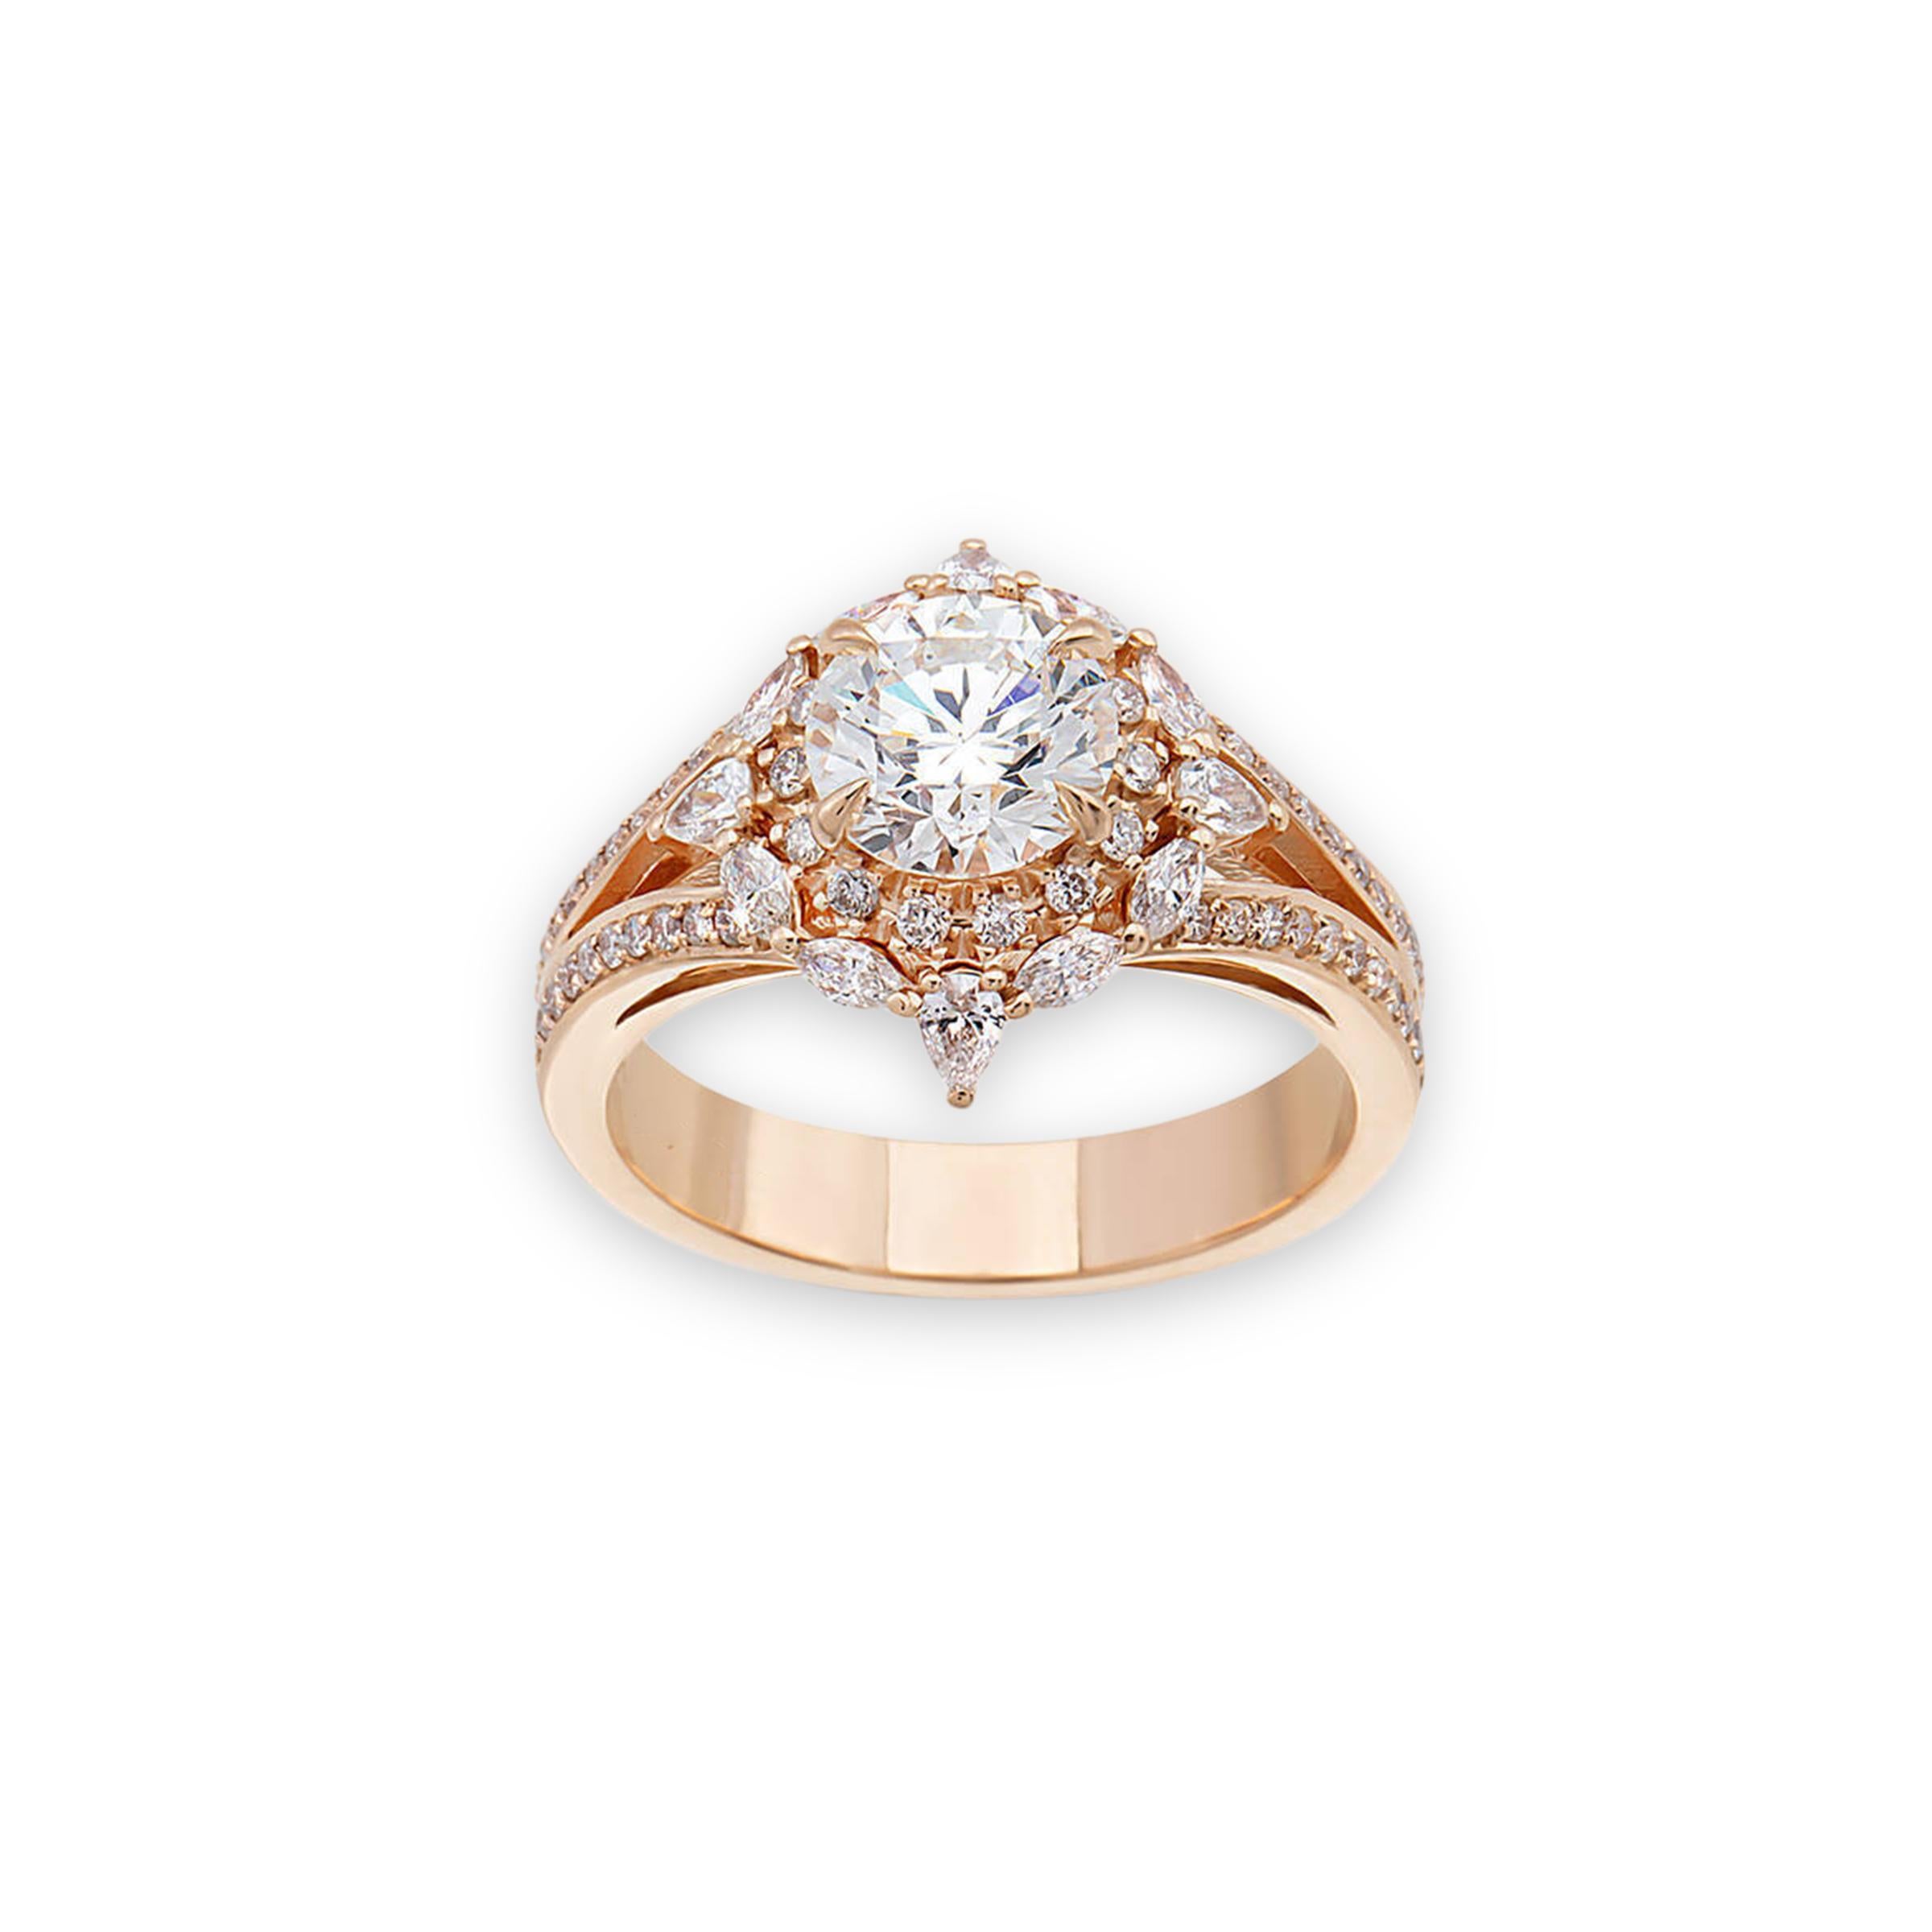 For Sale:  2.20 Carat Round, Pear and Marquise Cut Diamond 18K Rose Gold Ring 3